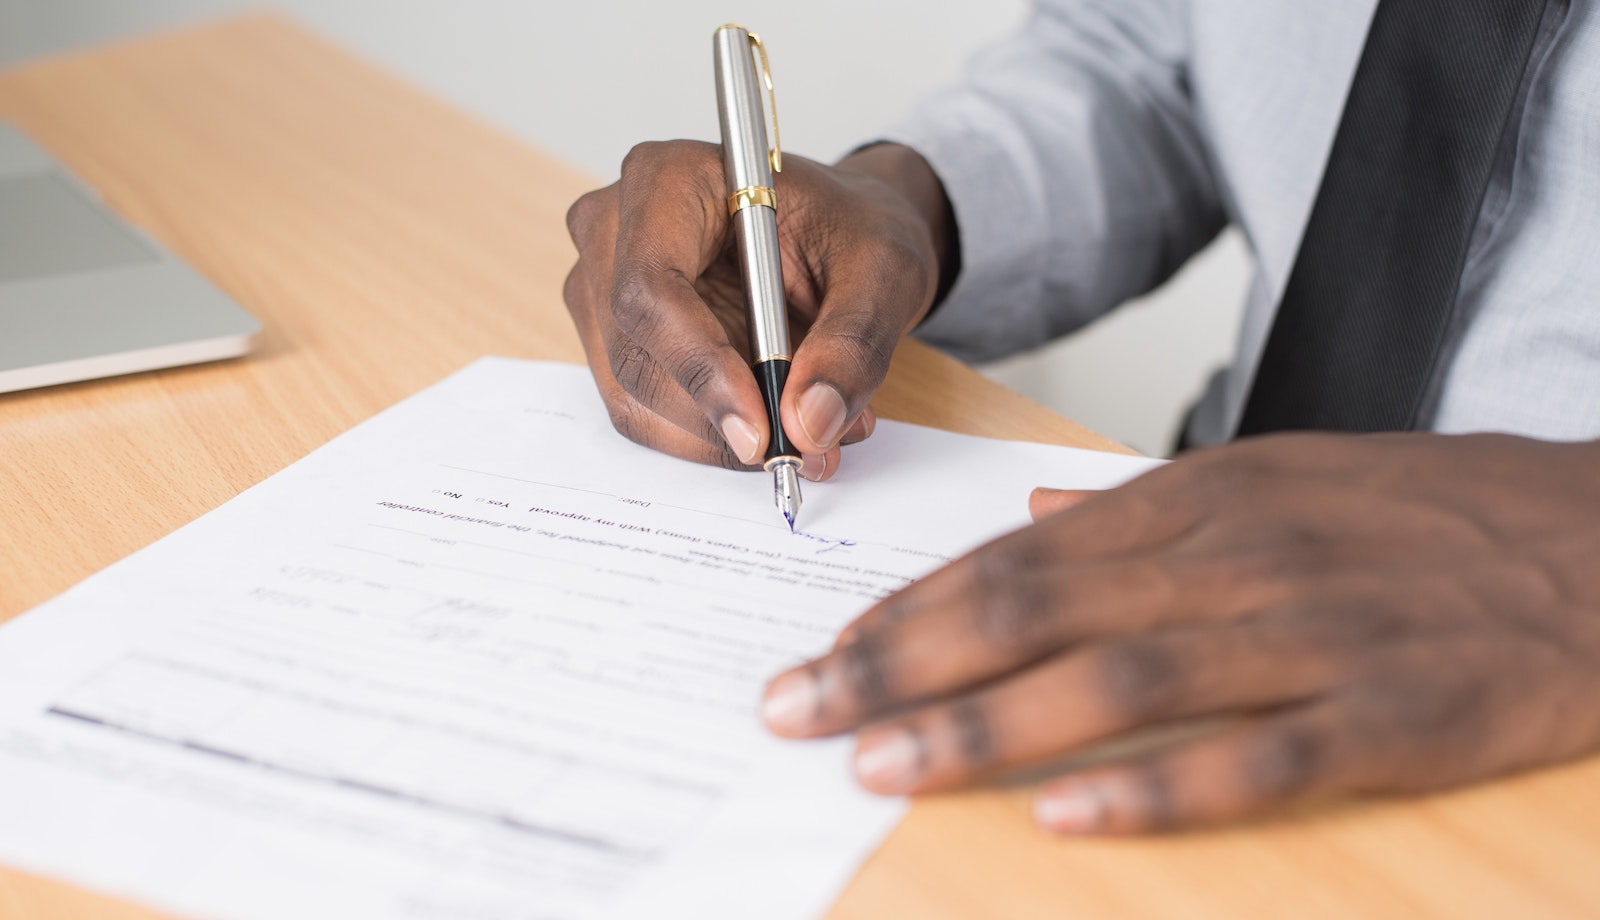 Close up image showing a person's hands as they sign a piece of paper on top of a wooden table